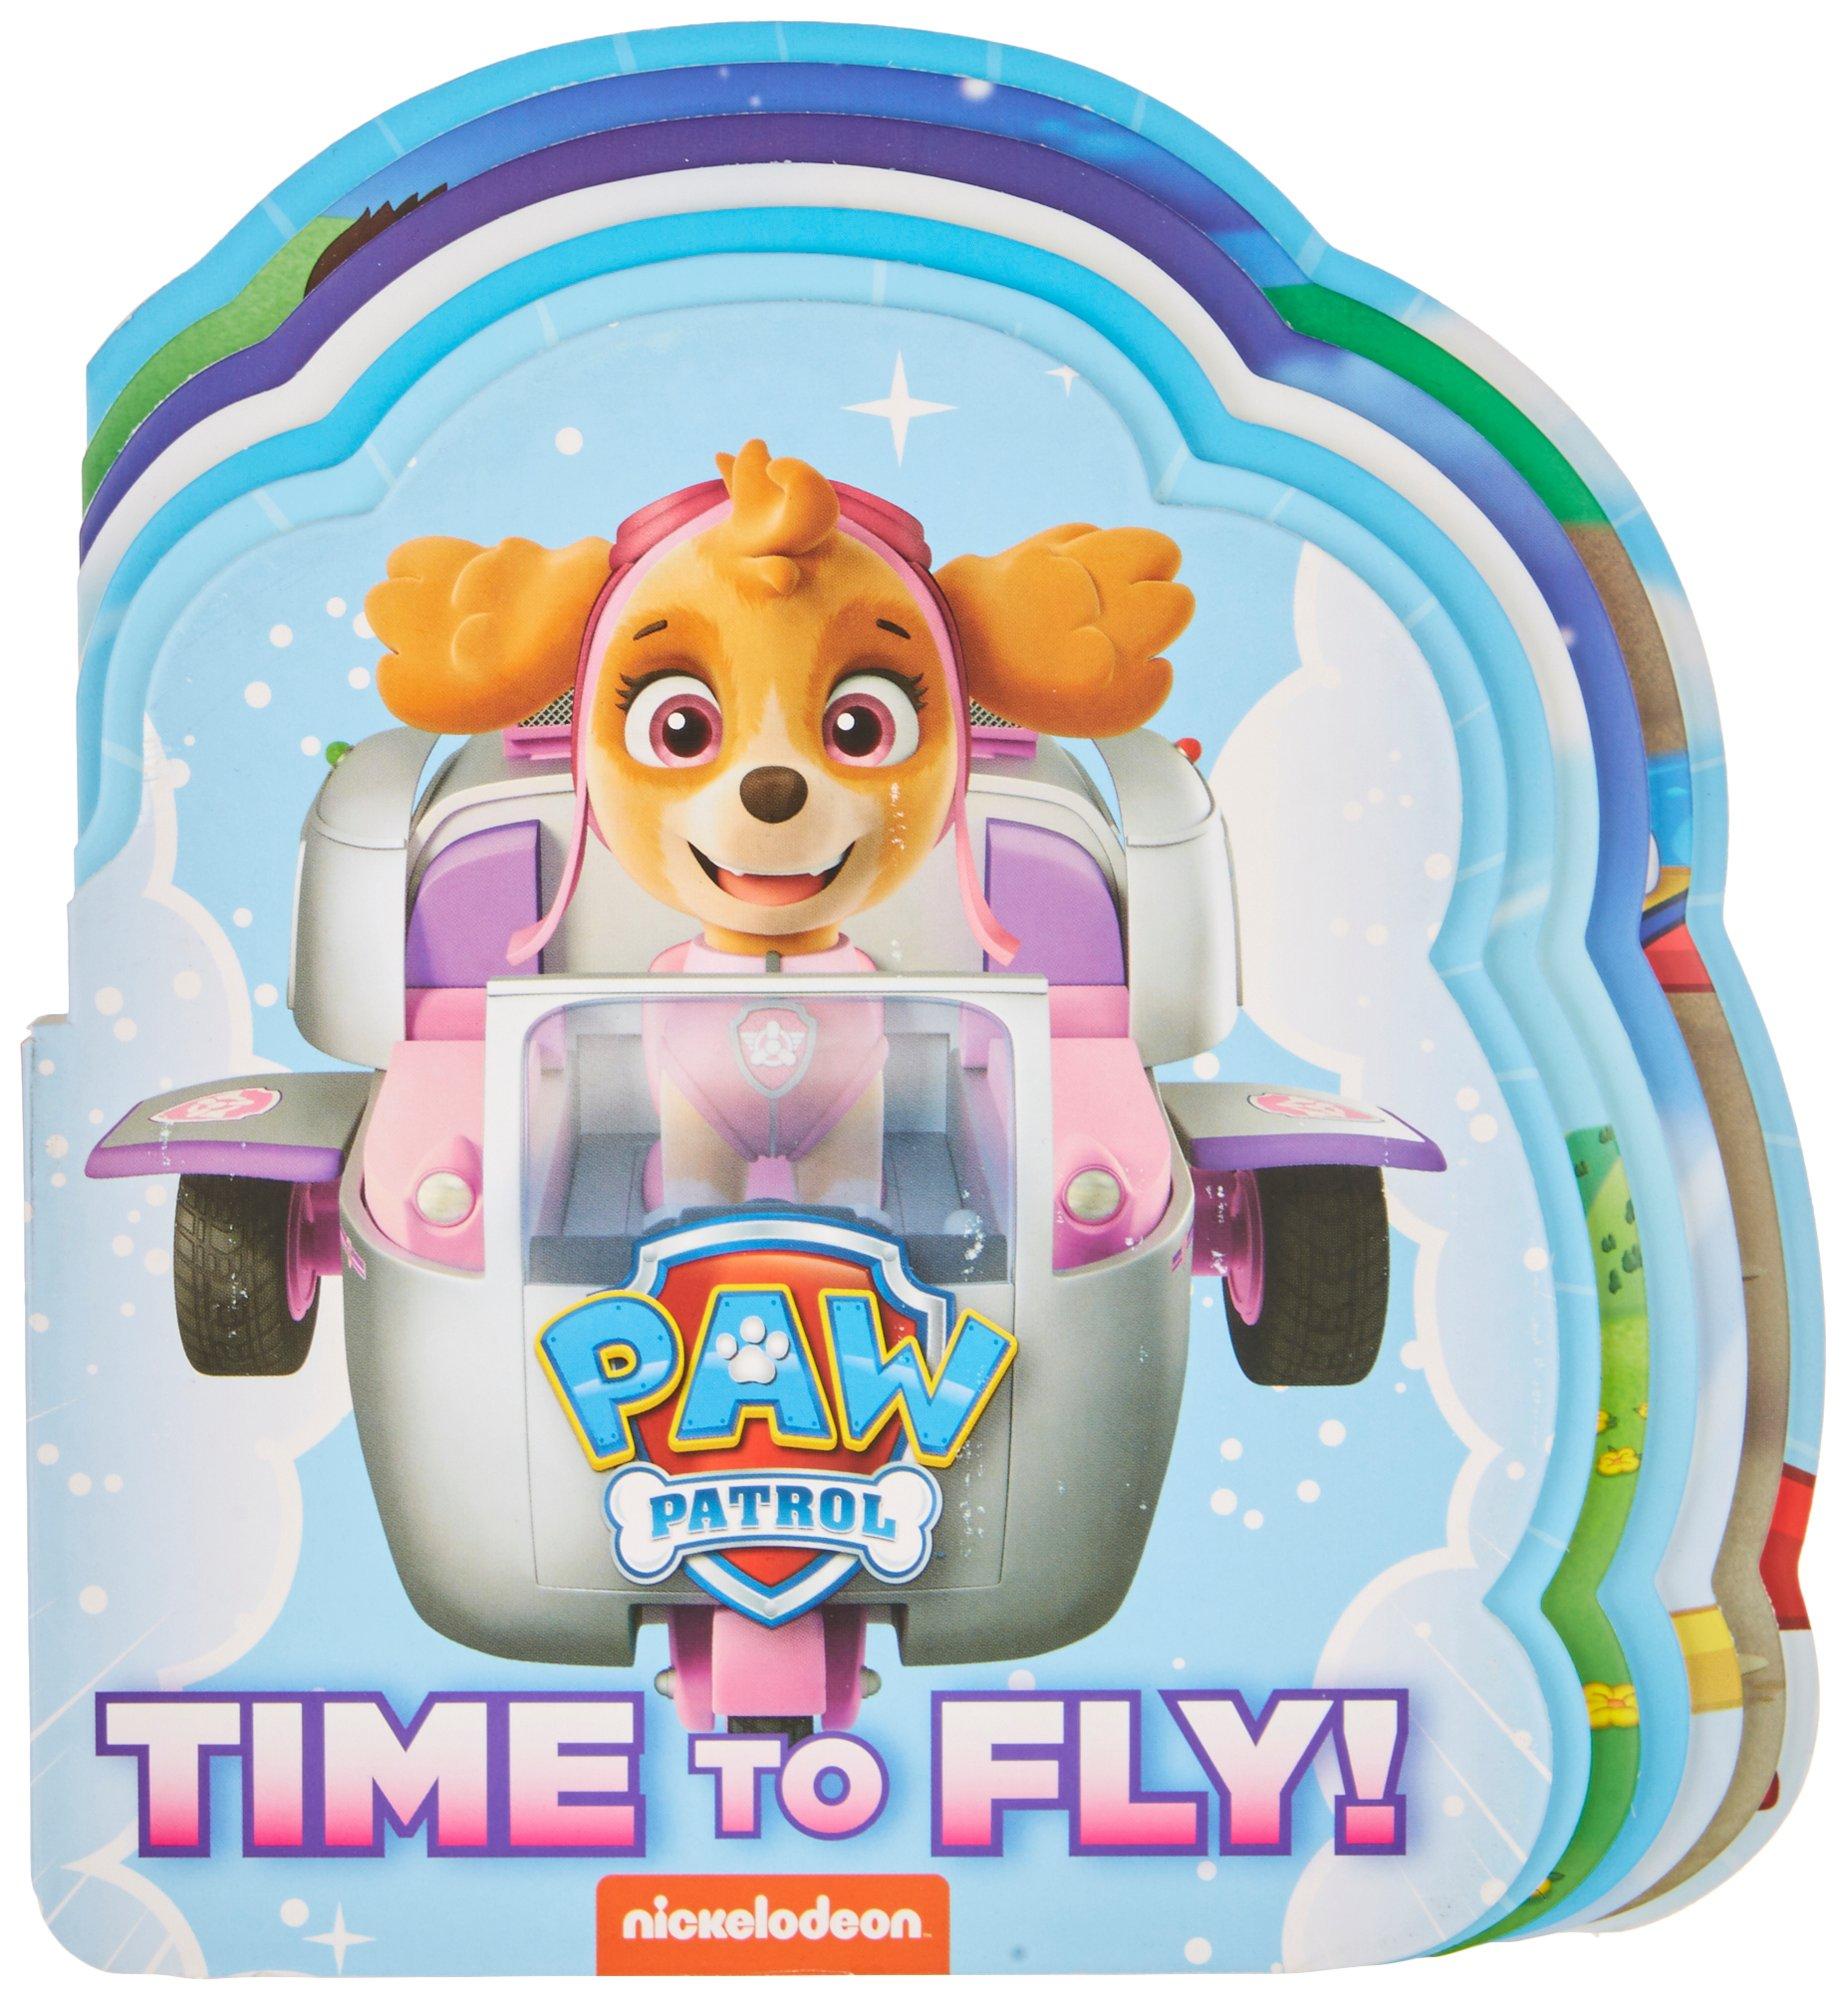 BOOK DEPOT Paw Patrol Time To Fly Book